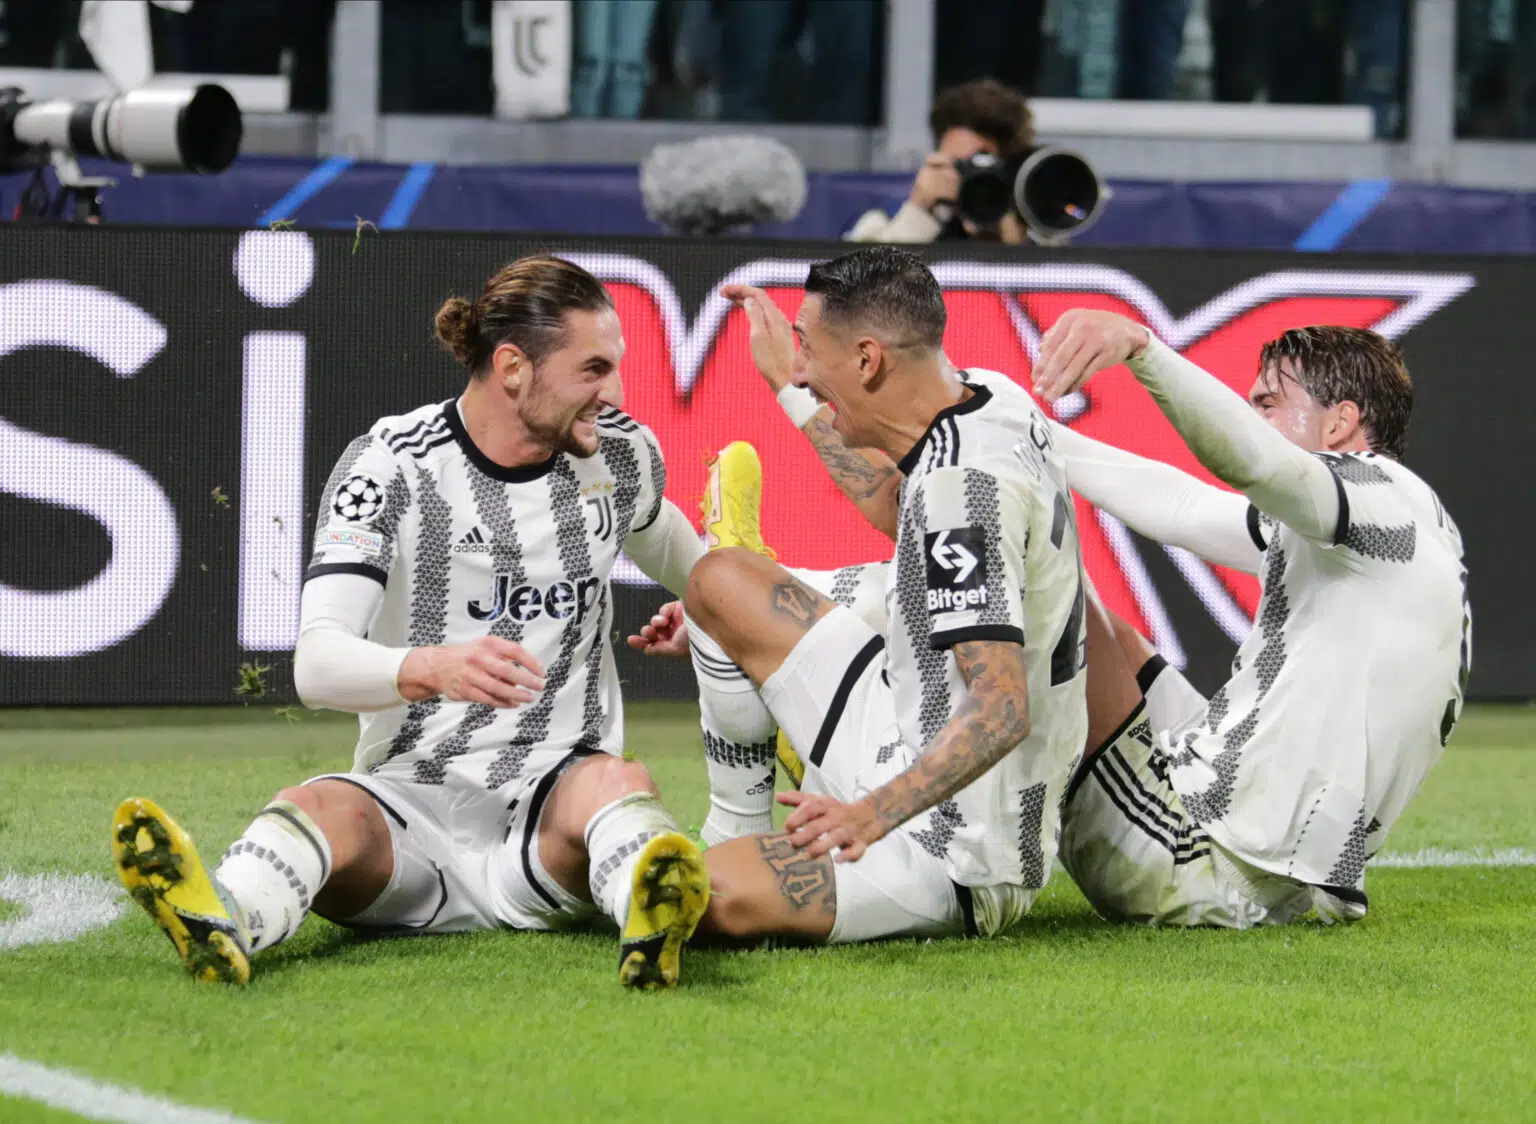 Due to a combination of factors, Angel Di Maria, Adrien Rabiot, and Leandro Paredes have likely played their last home game with Juventus versus Milan.